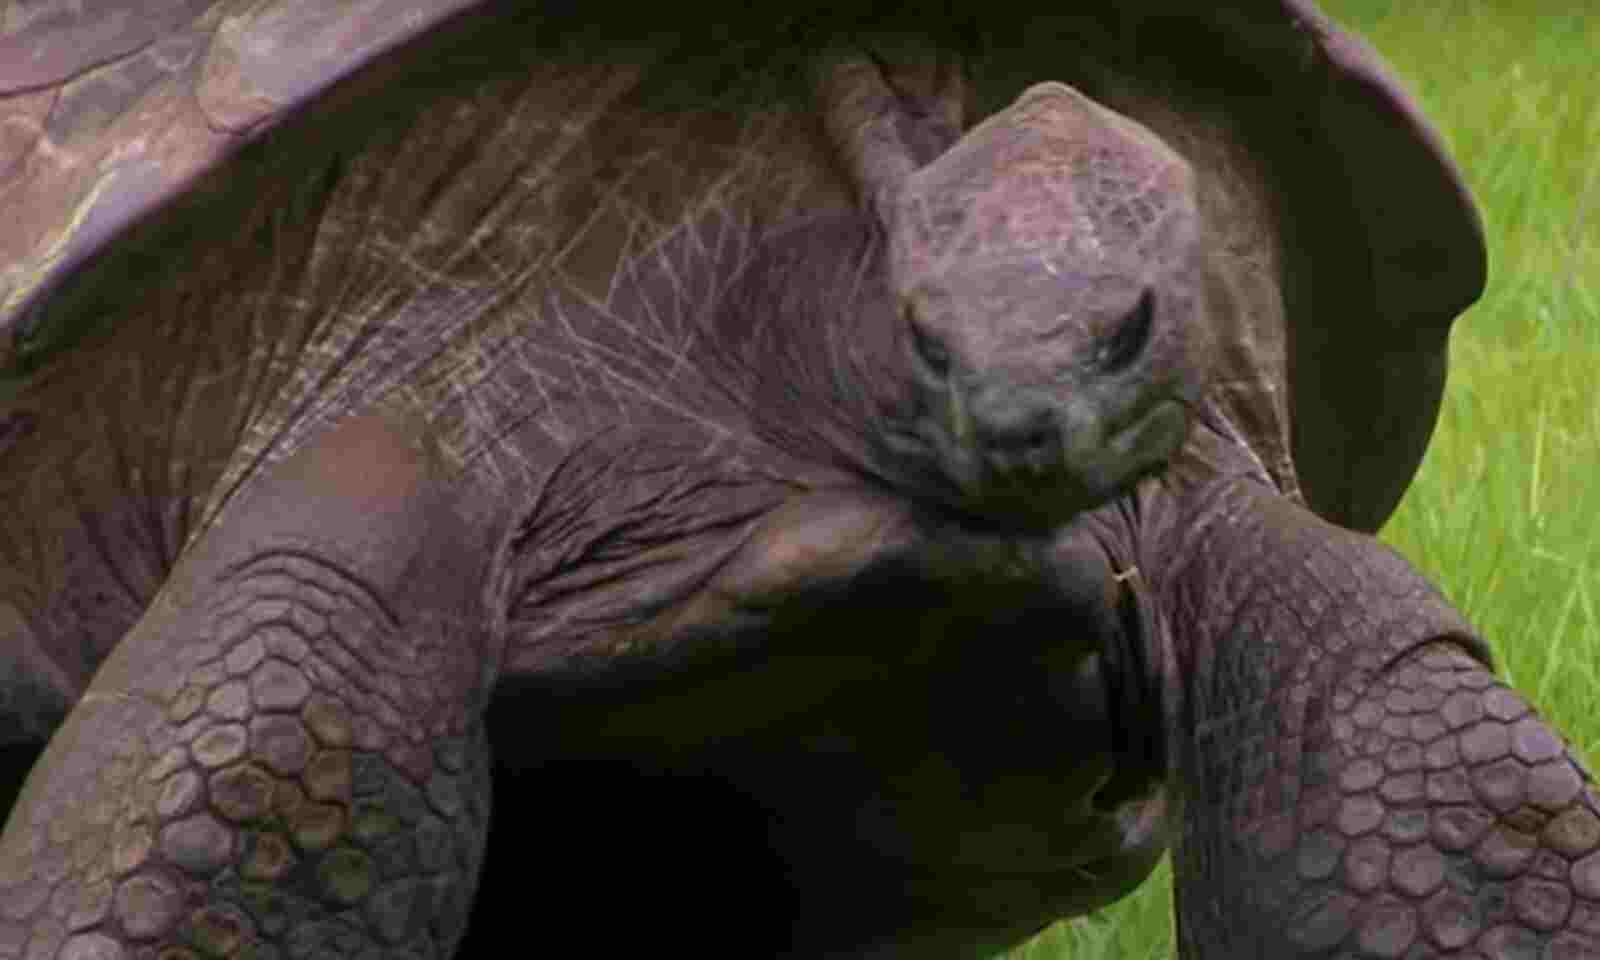 190 Years Old Tortoise Hold Guinness World Record For Being The World's  Oldest Living Land Animal